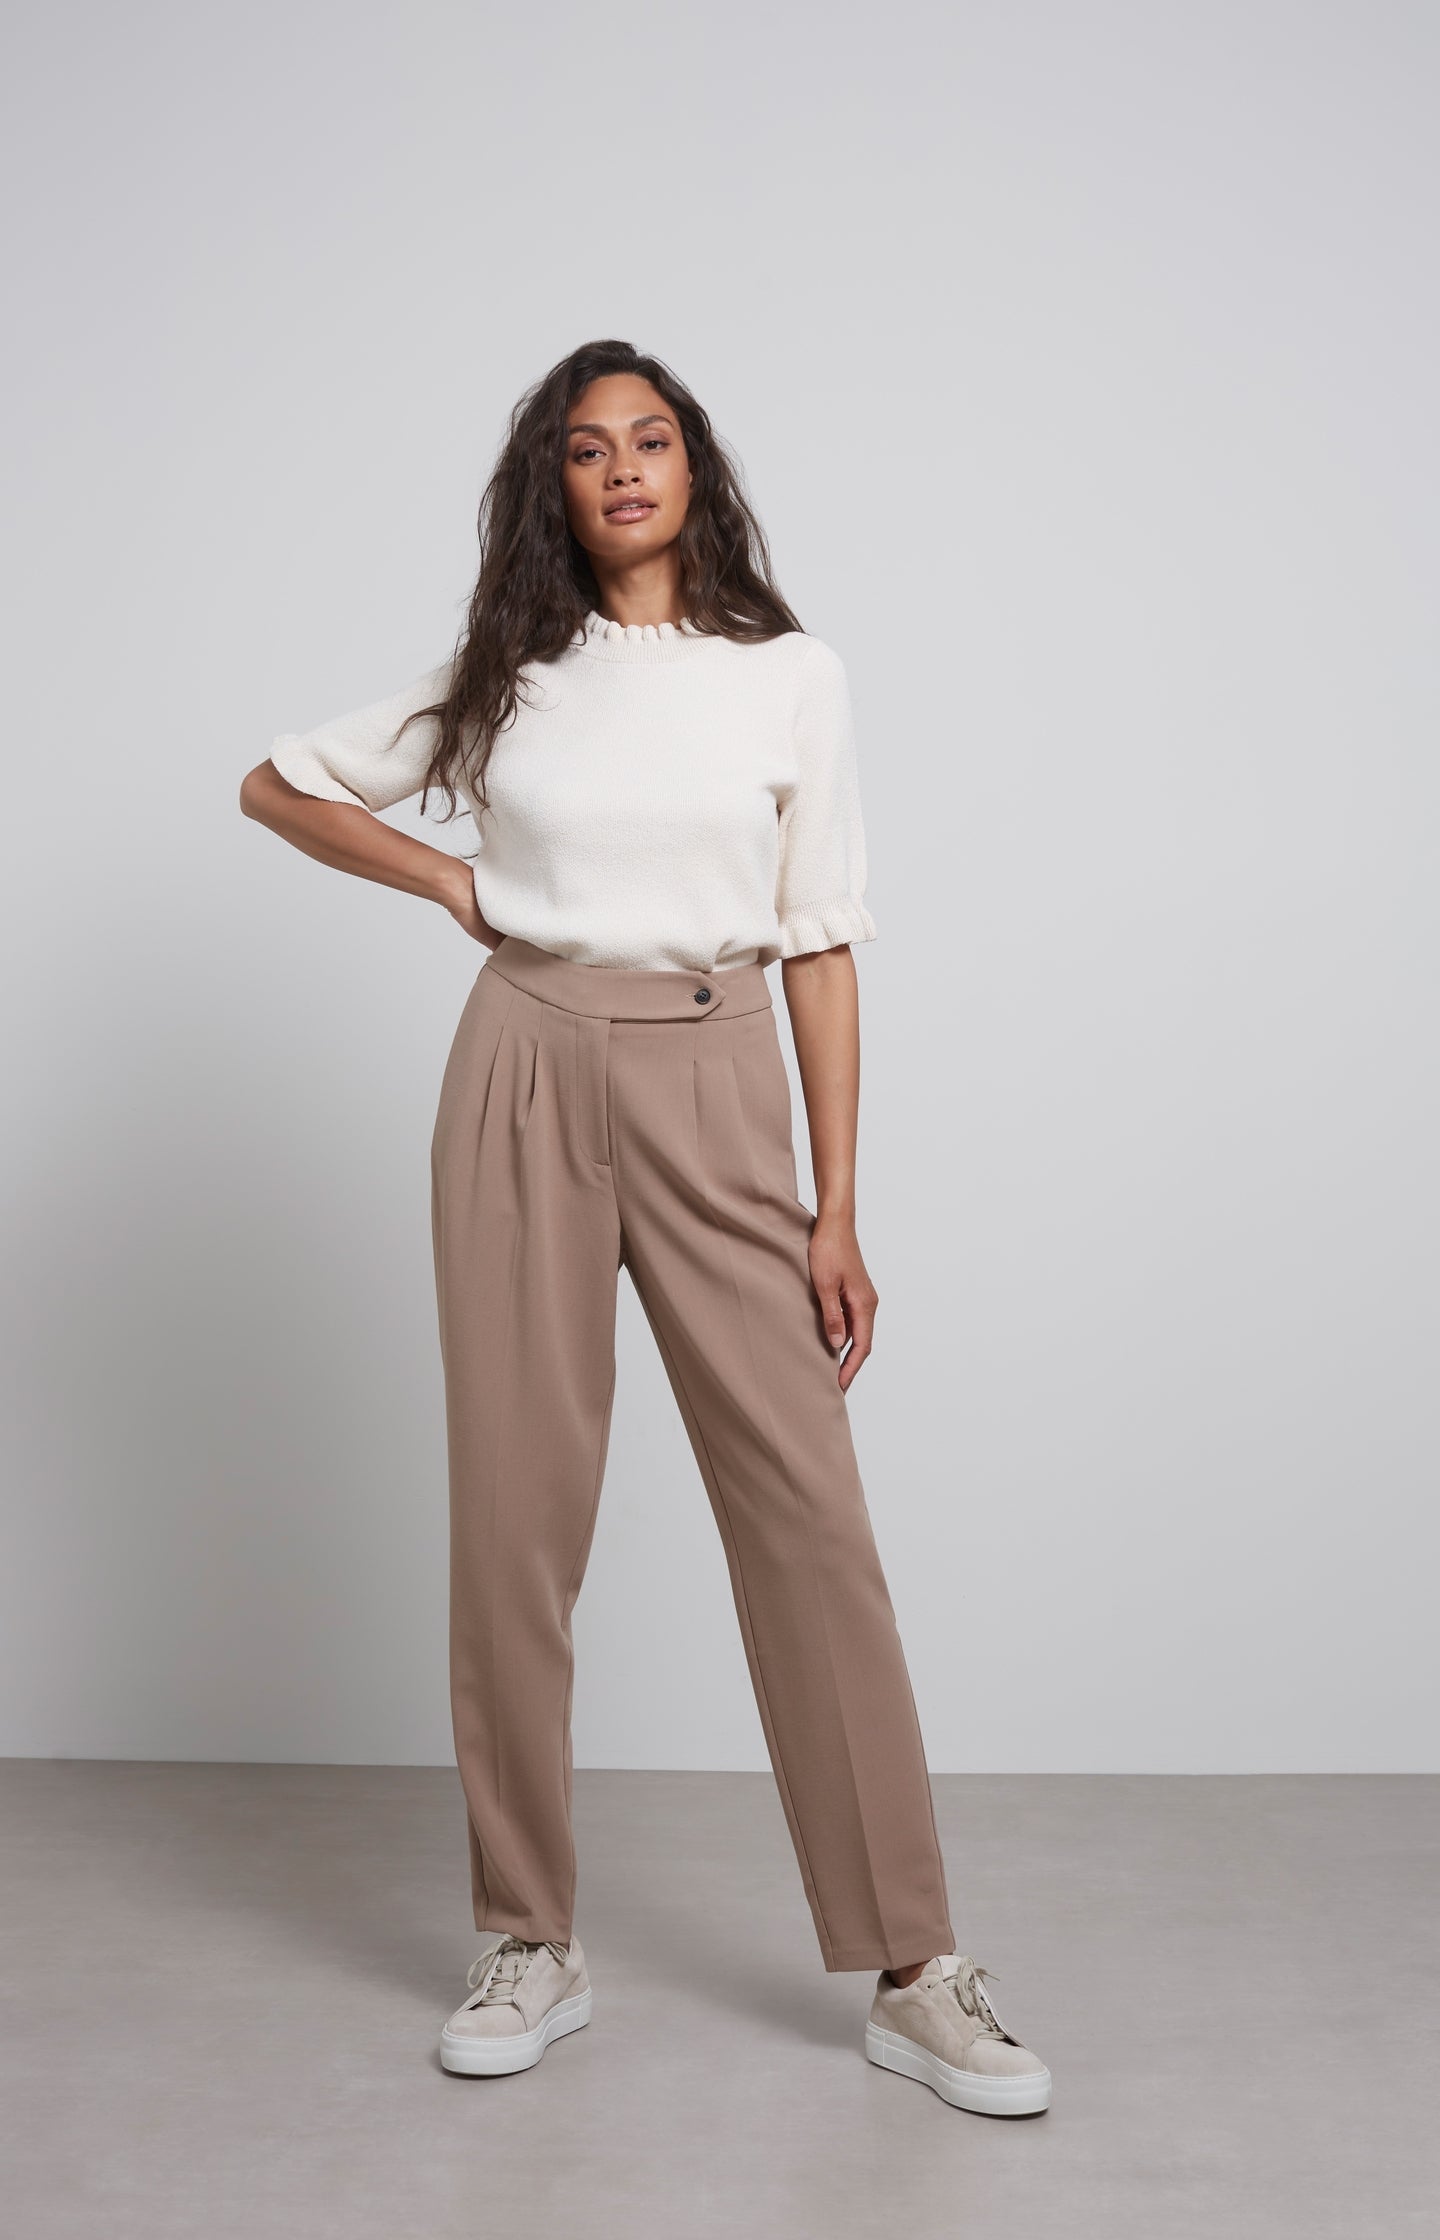 High waist trousers with pleated details and side pockets - Type: lookbook